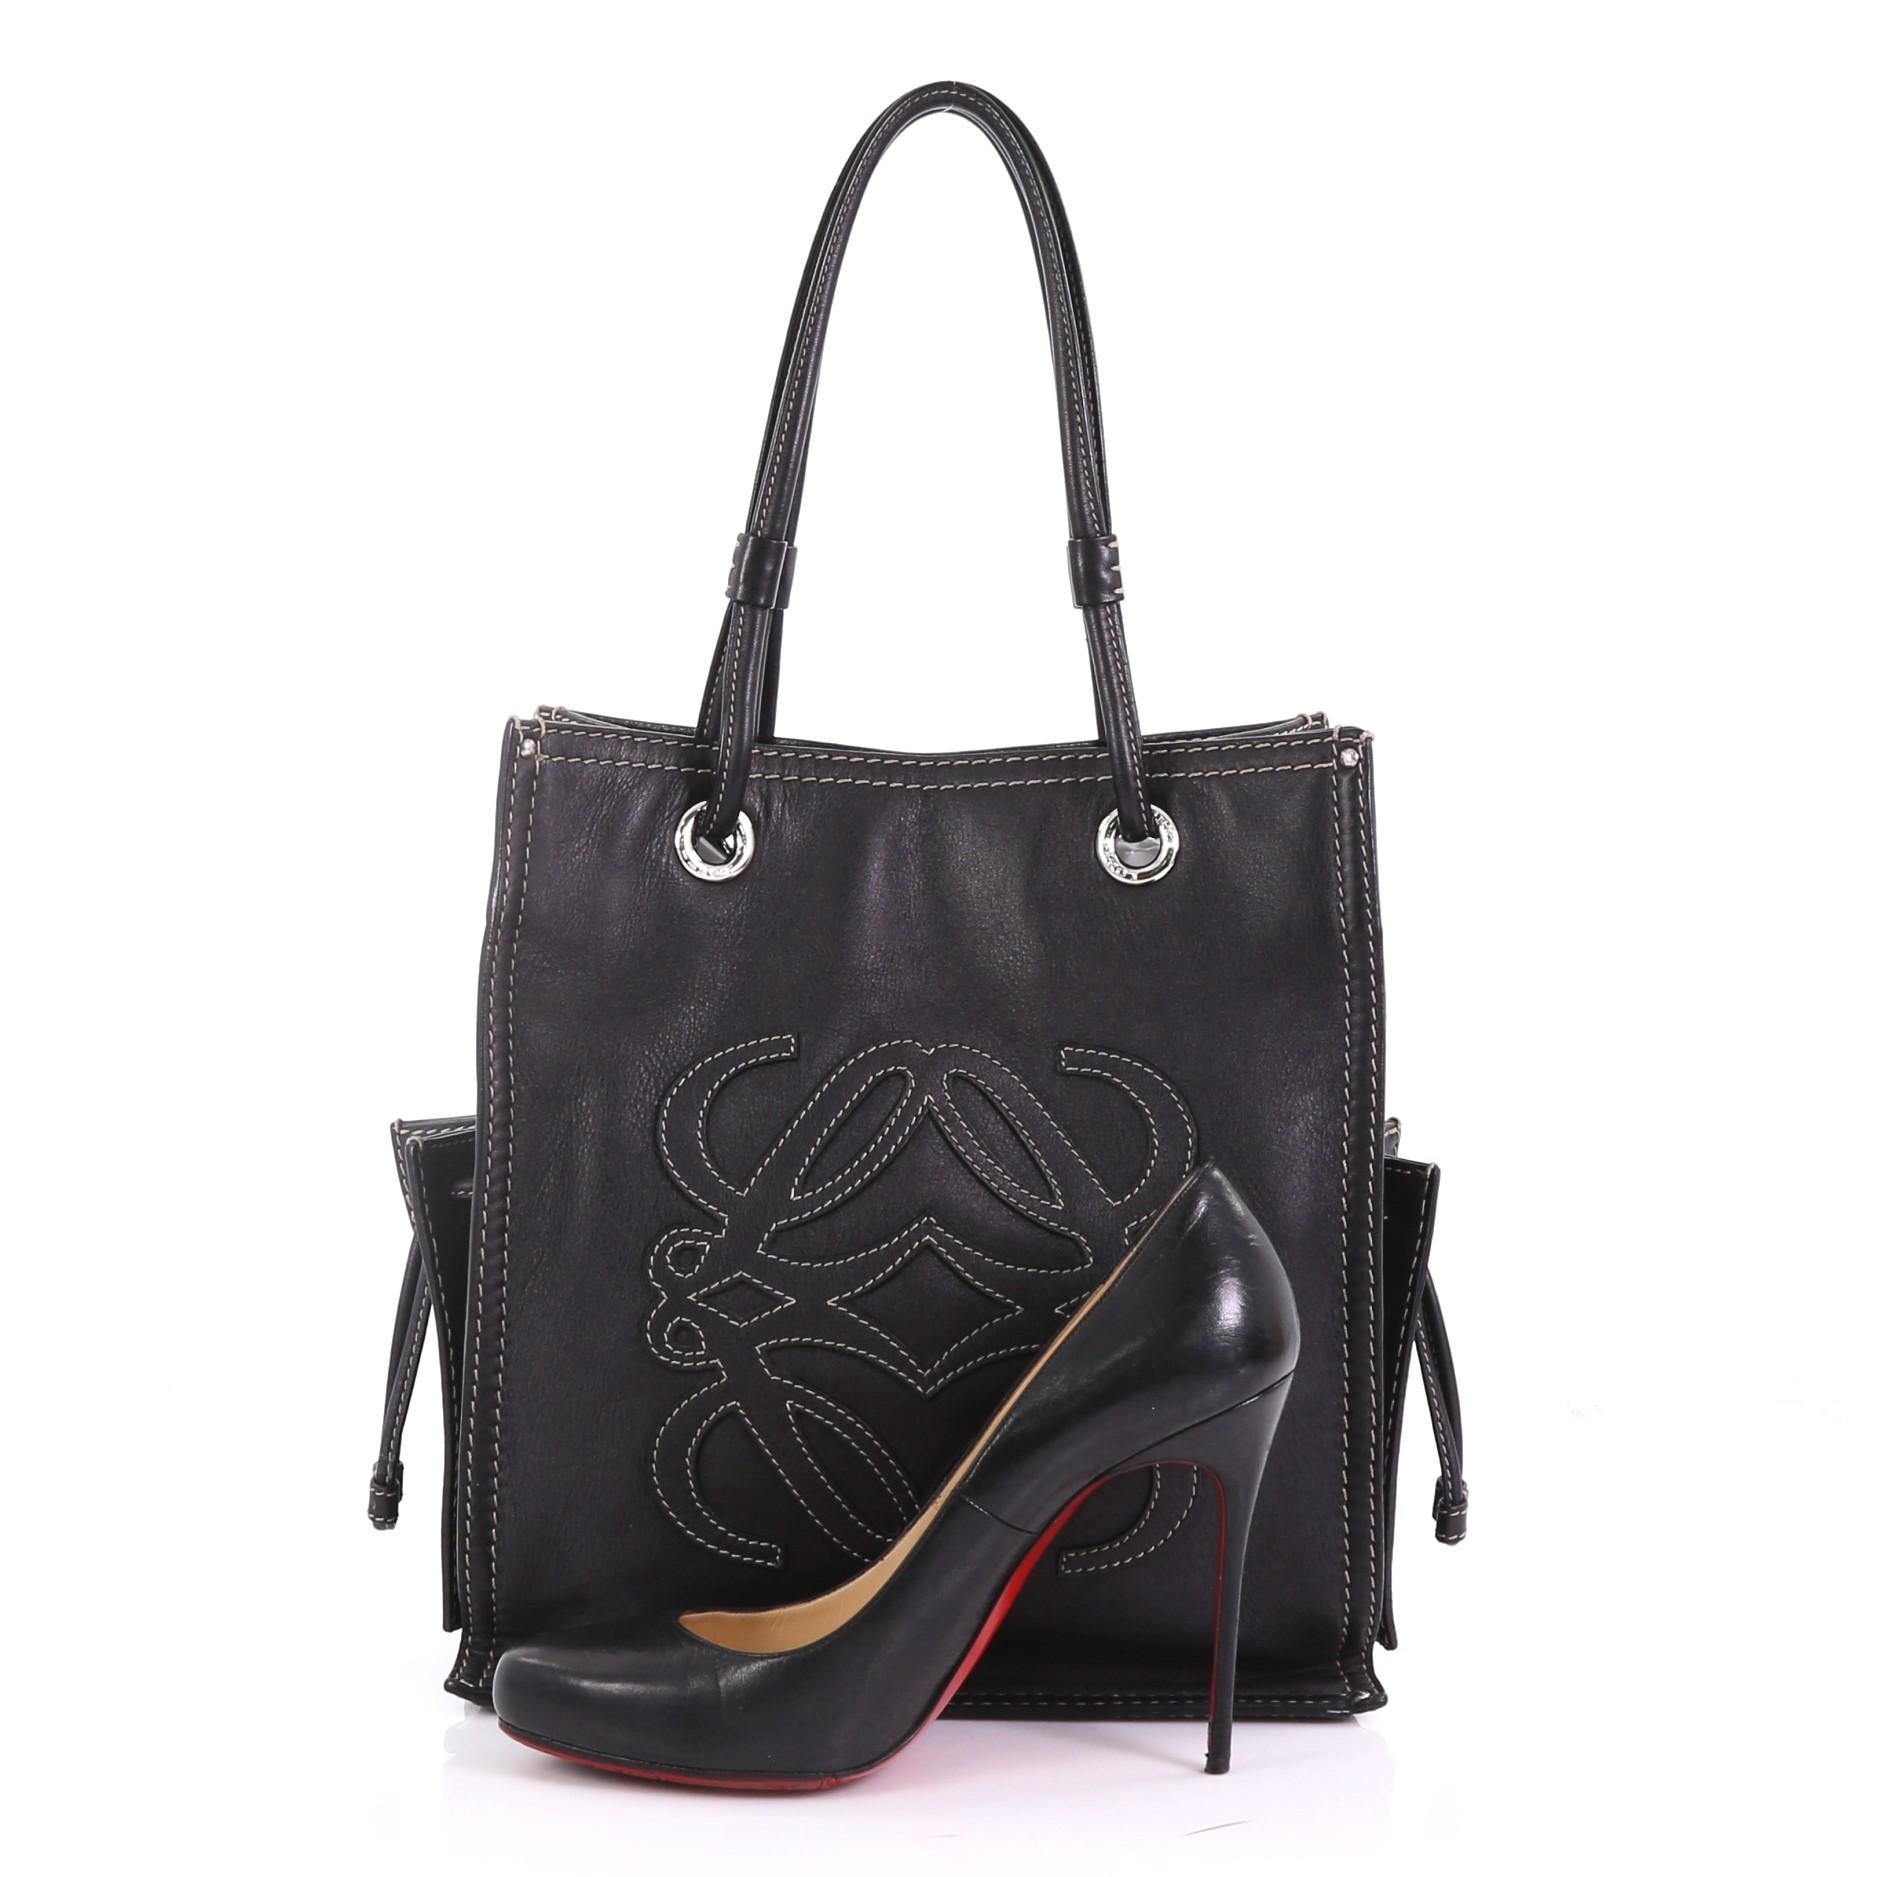 This Loewe Vintage Logo Tote Leather Medium, crafted from black leather, features dual leather straps, standout contrast stitching, exterior side pocket with cinch closure, and silver-tone hardware. Its magnetic snap closure opens to a black fabric